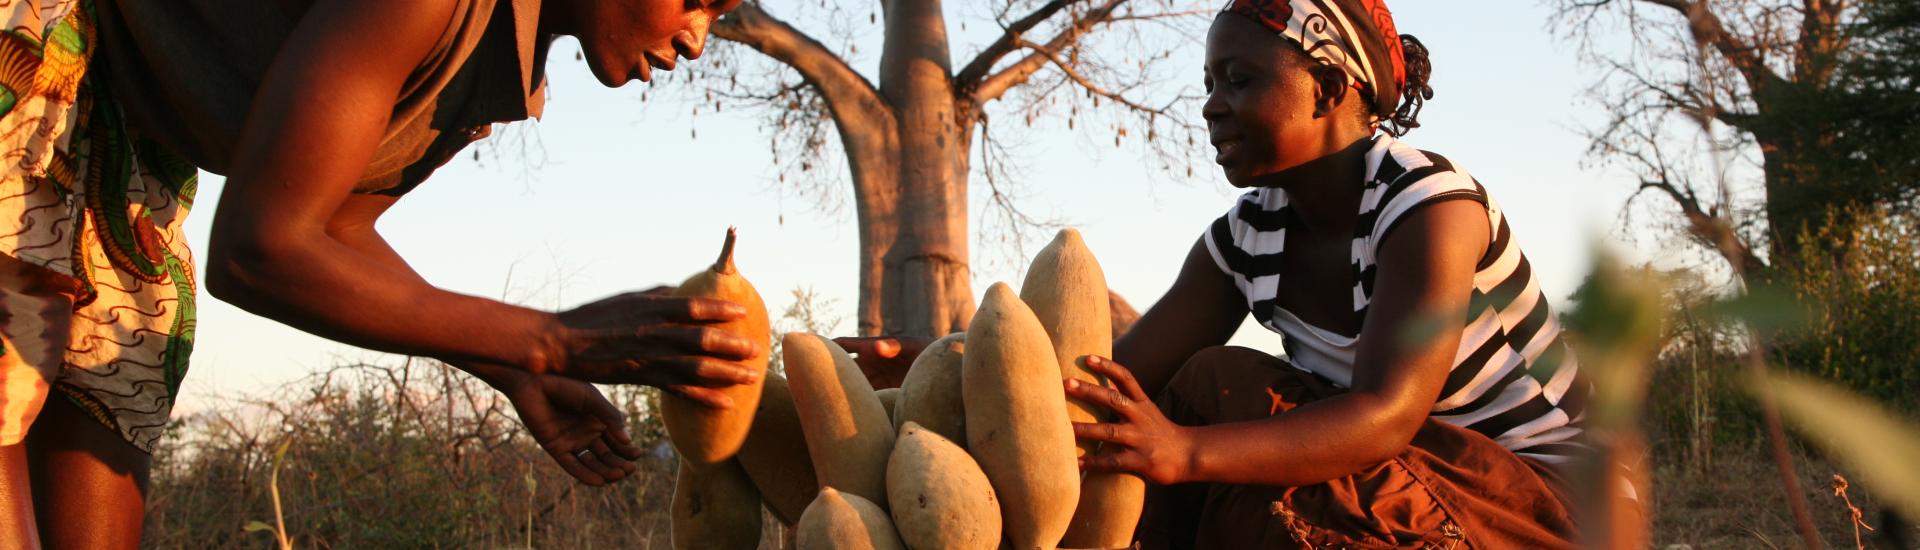 Two baobab farmers filling a basket with fruit, with a baobab tree in the background